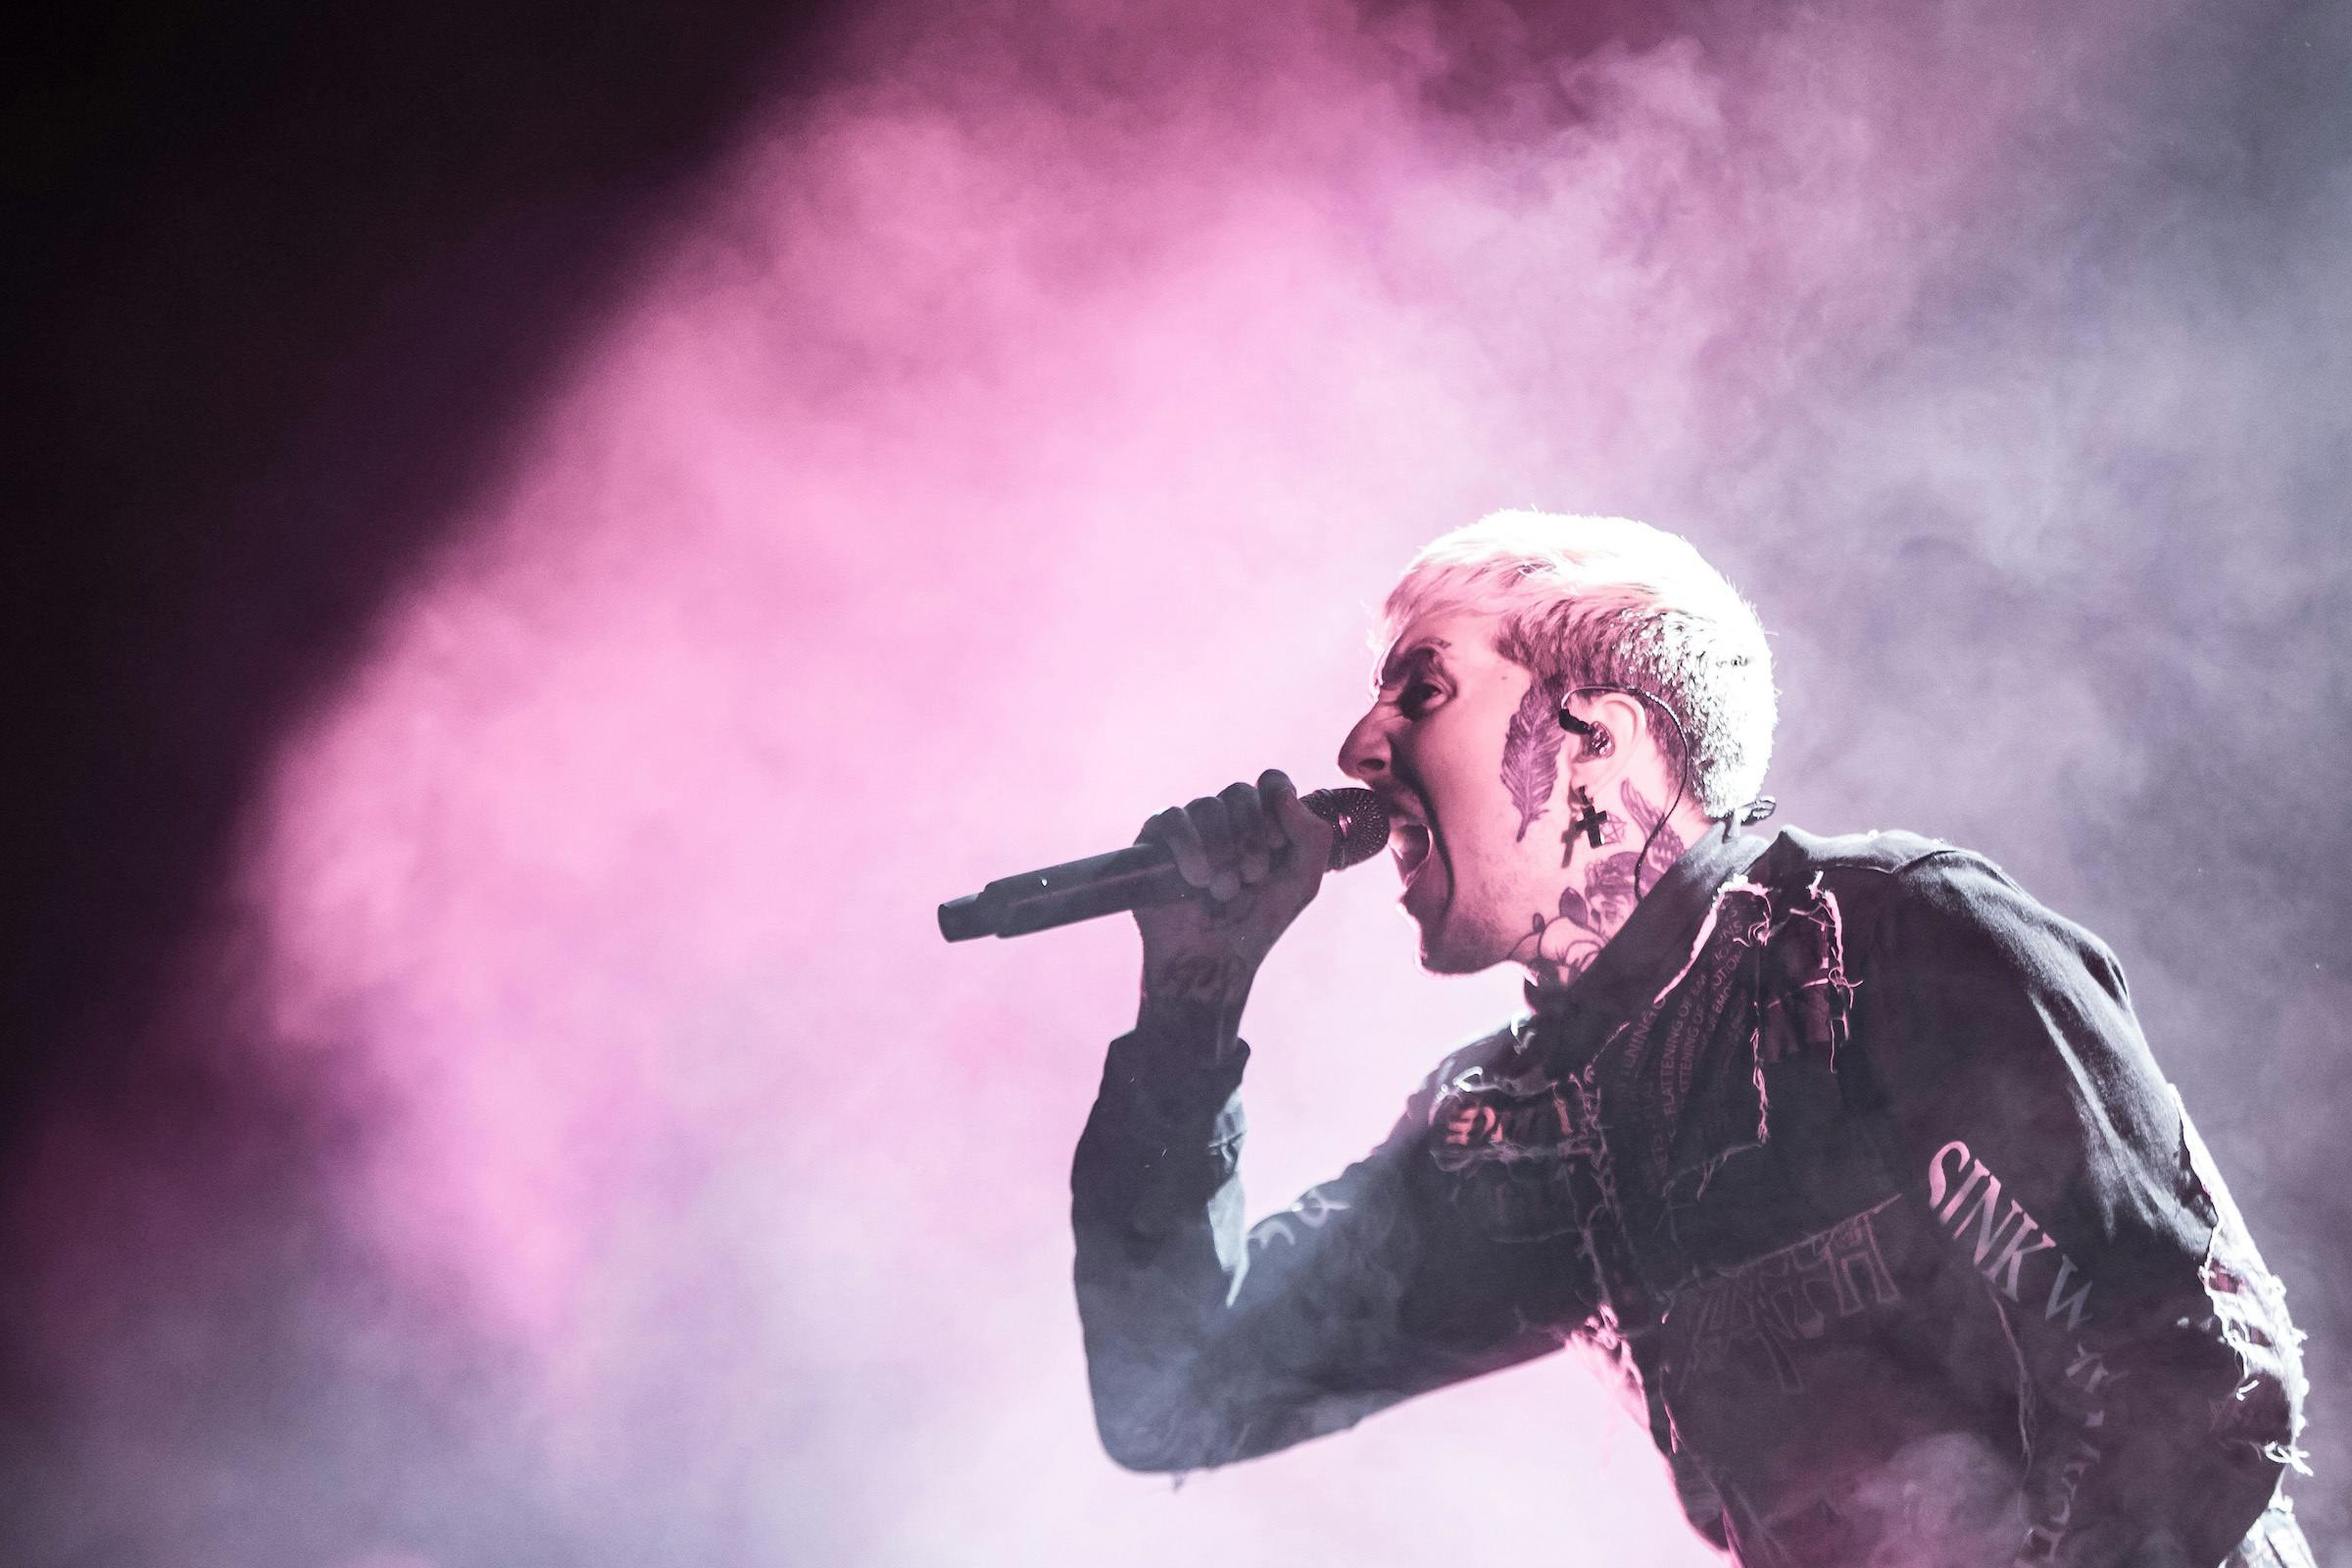 What Bring Me The Horizon Taught Me About Linkin Park's Legacy